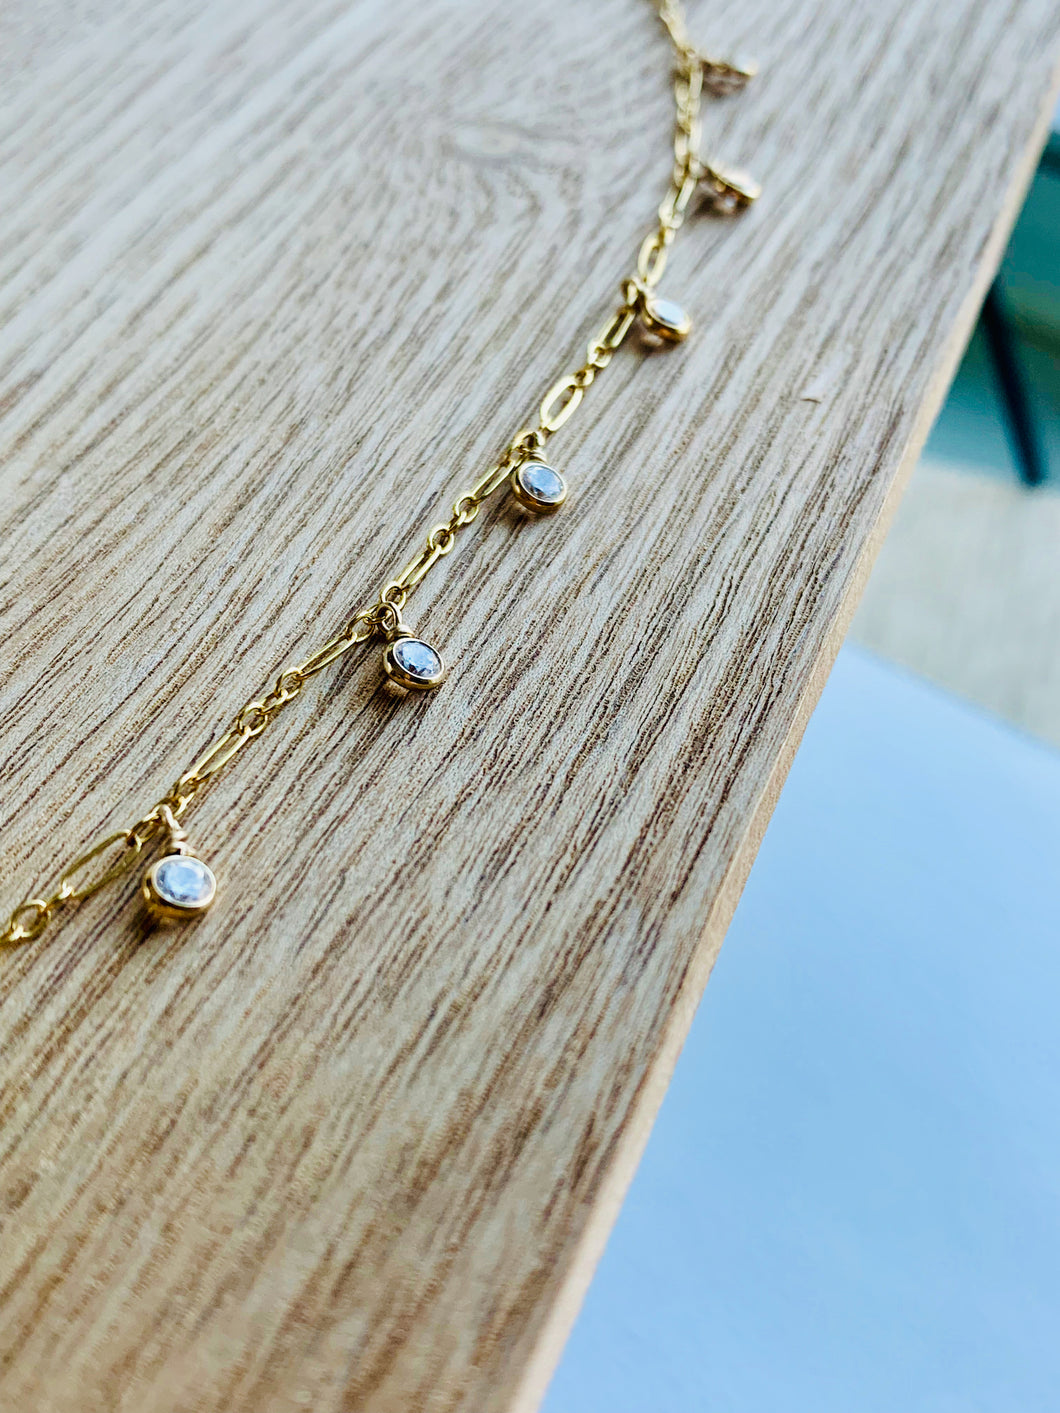 14k Gold Fill Misty Morning Necklace with tiny dangling Cubic Zirconia Droplets on a piece of natural wood.